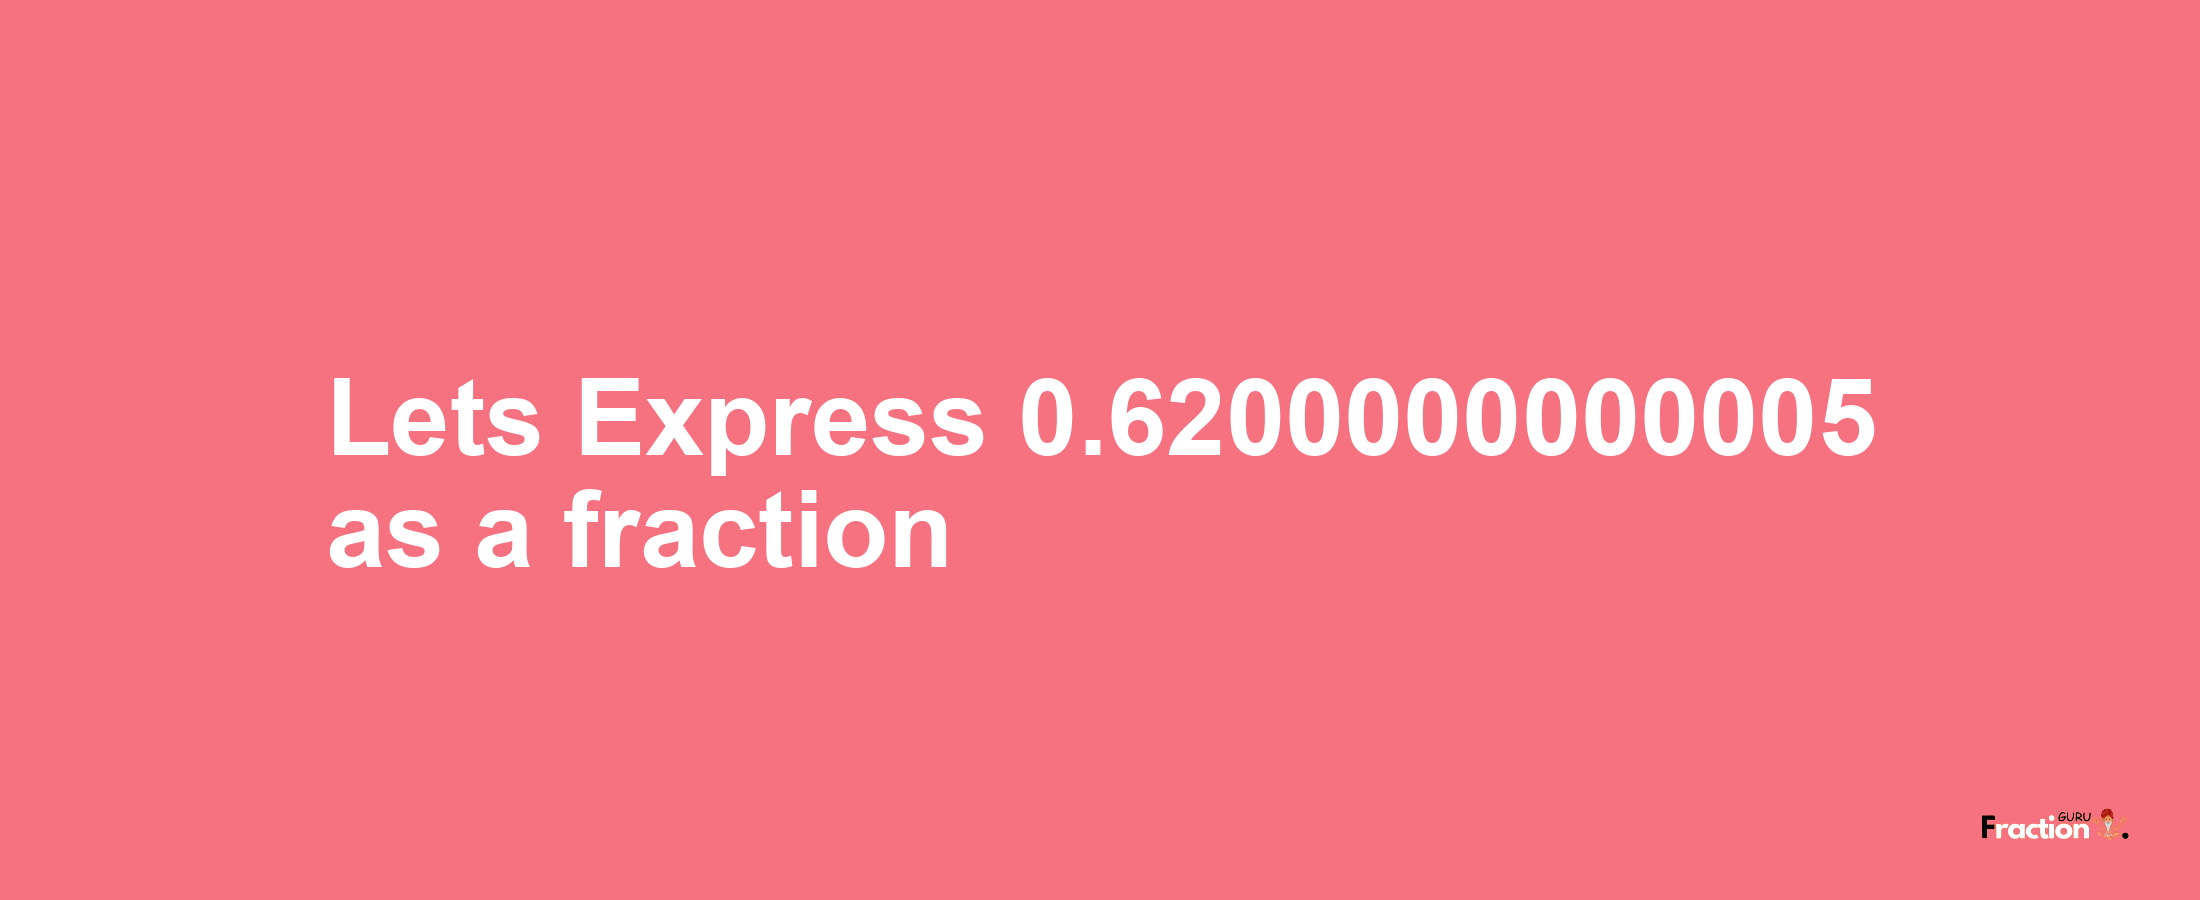 Lets Express 0.6200000000005 as afraction